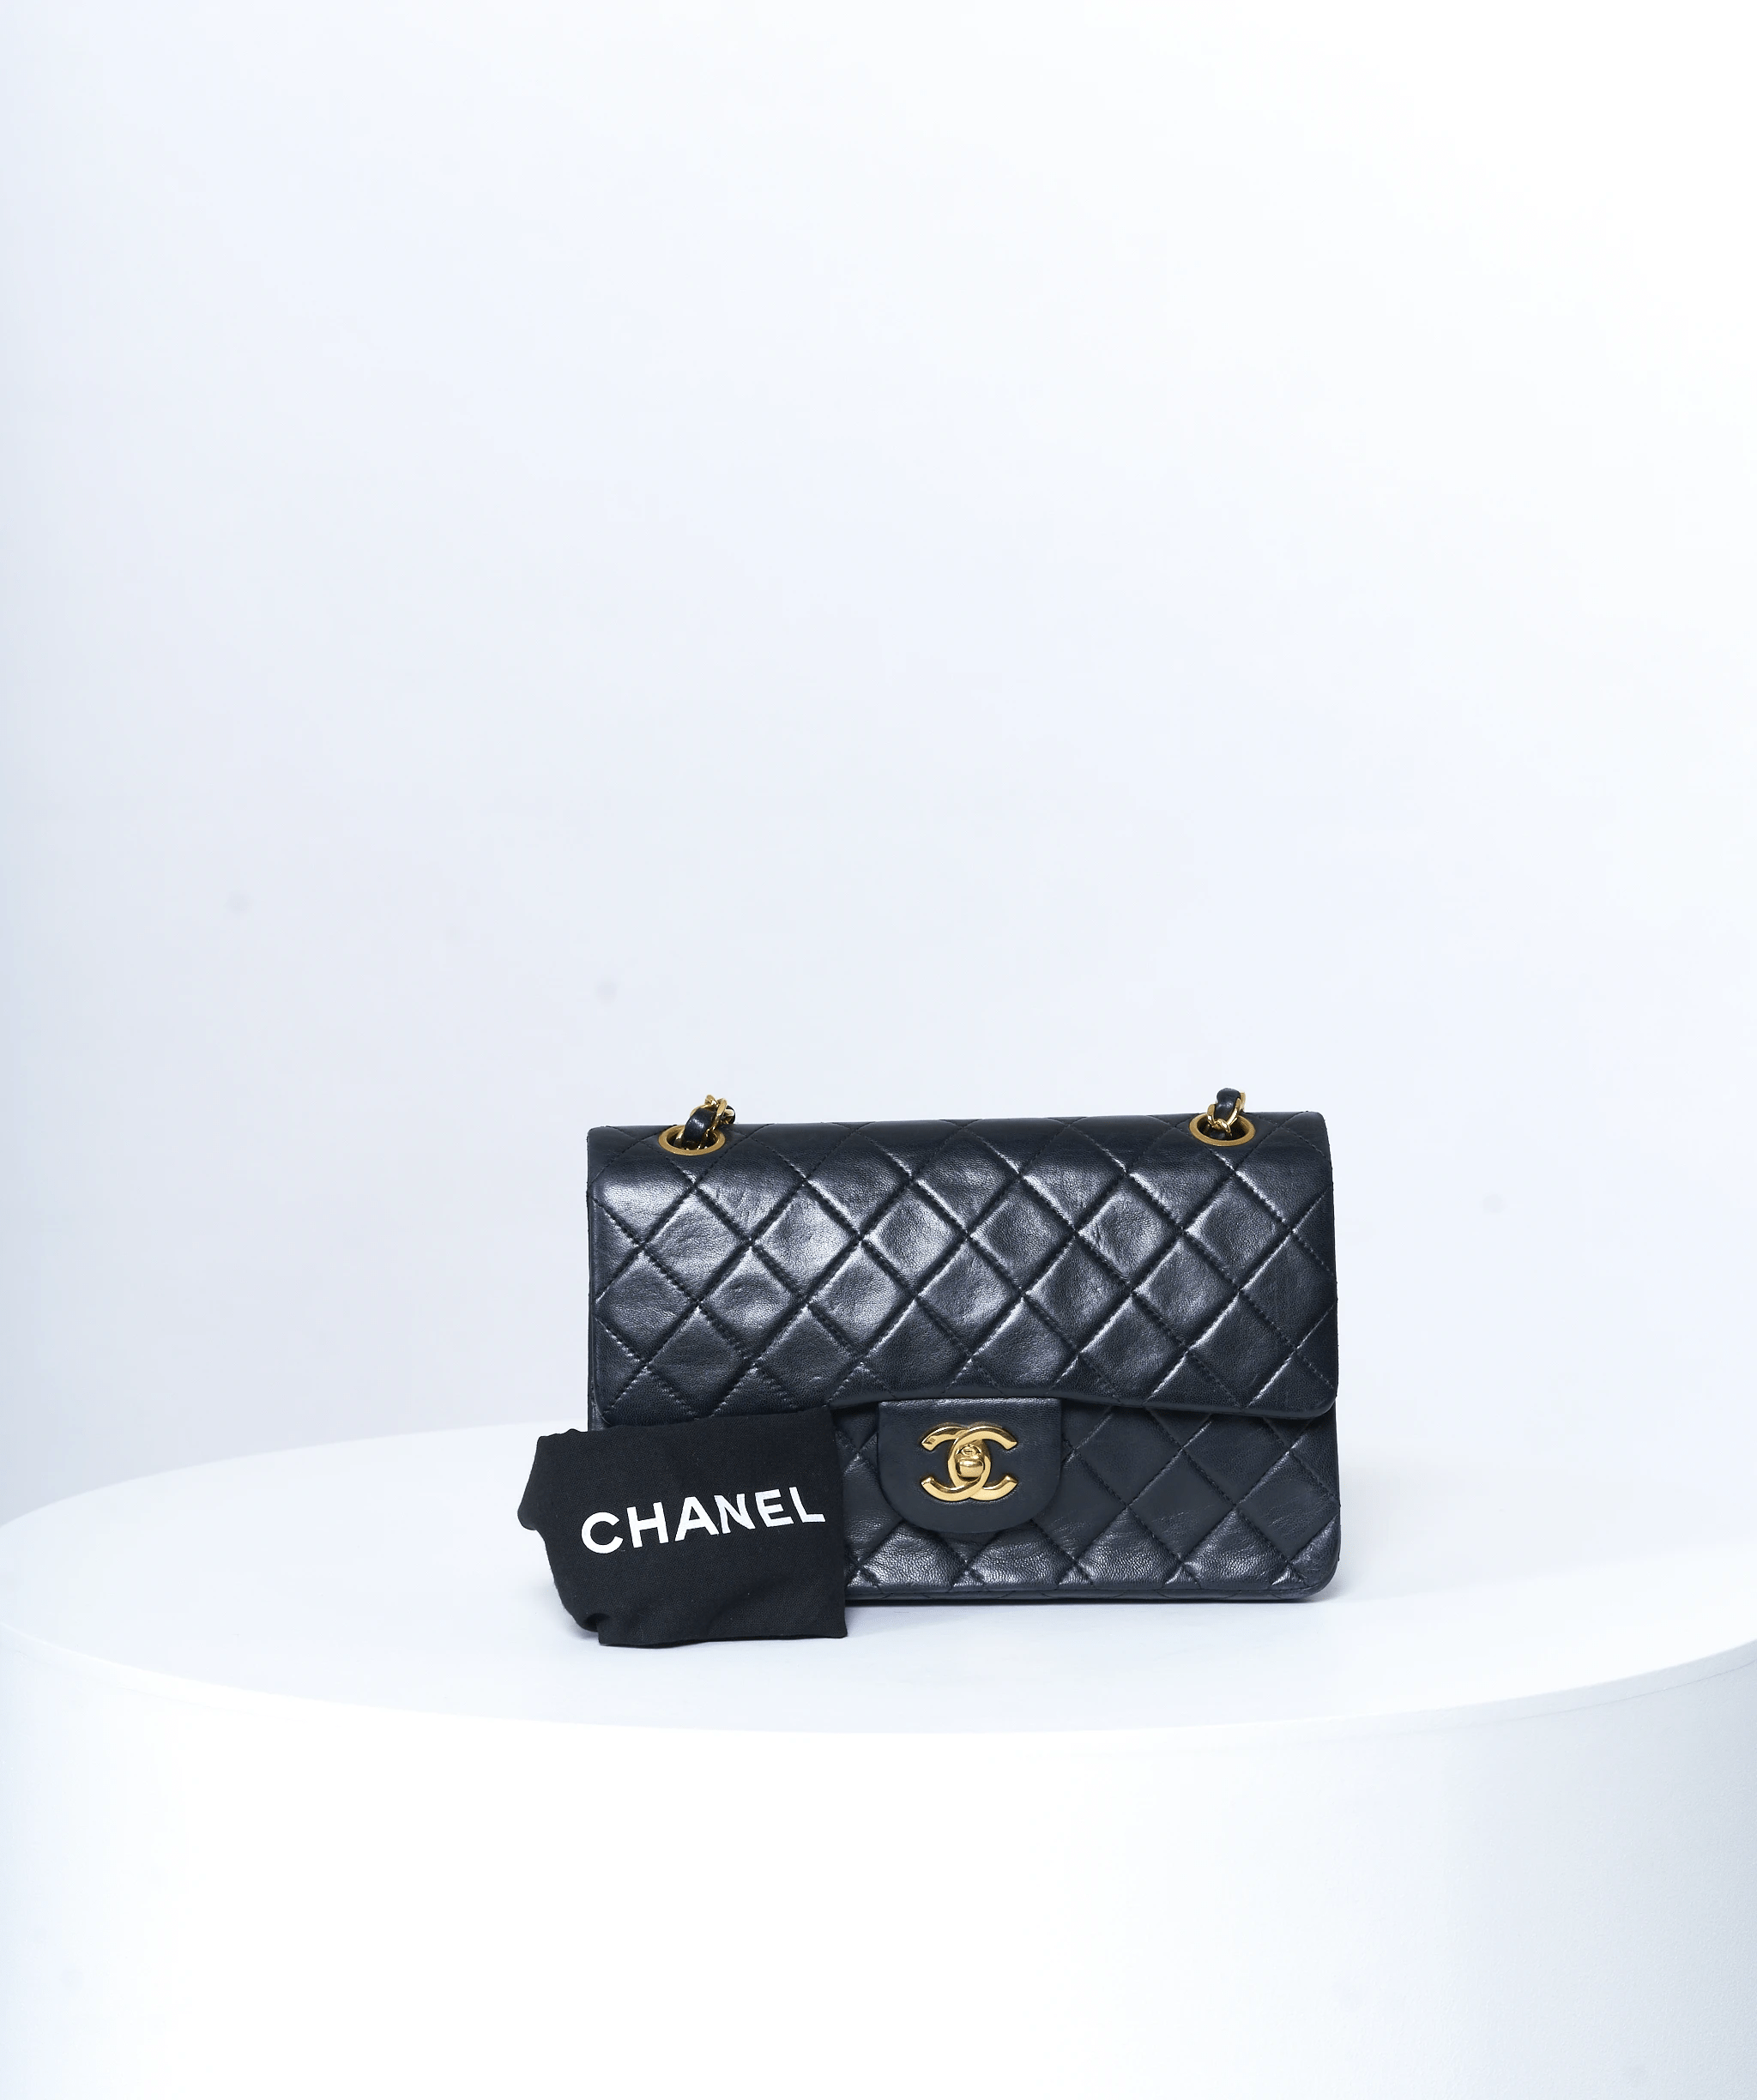 Chanel Chanel 9 inch leather bag - small